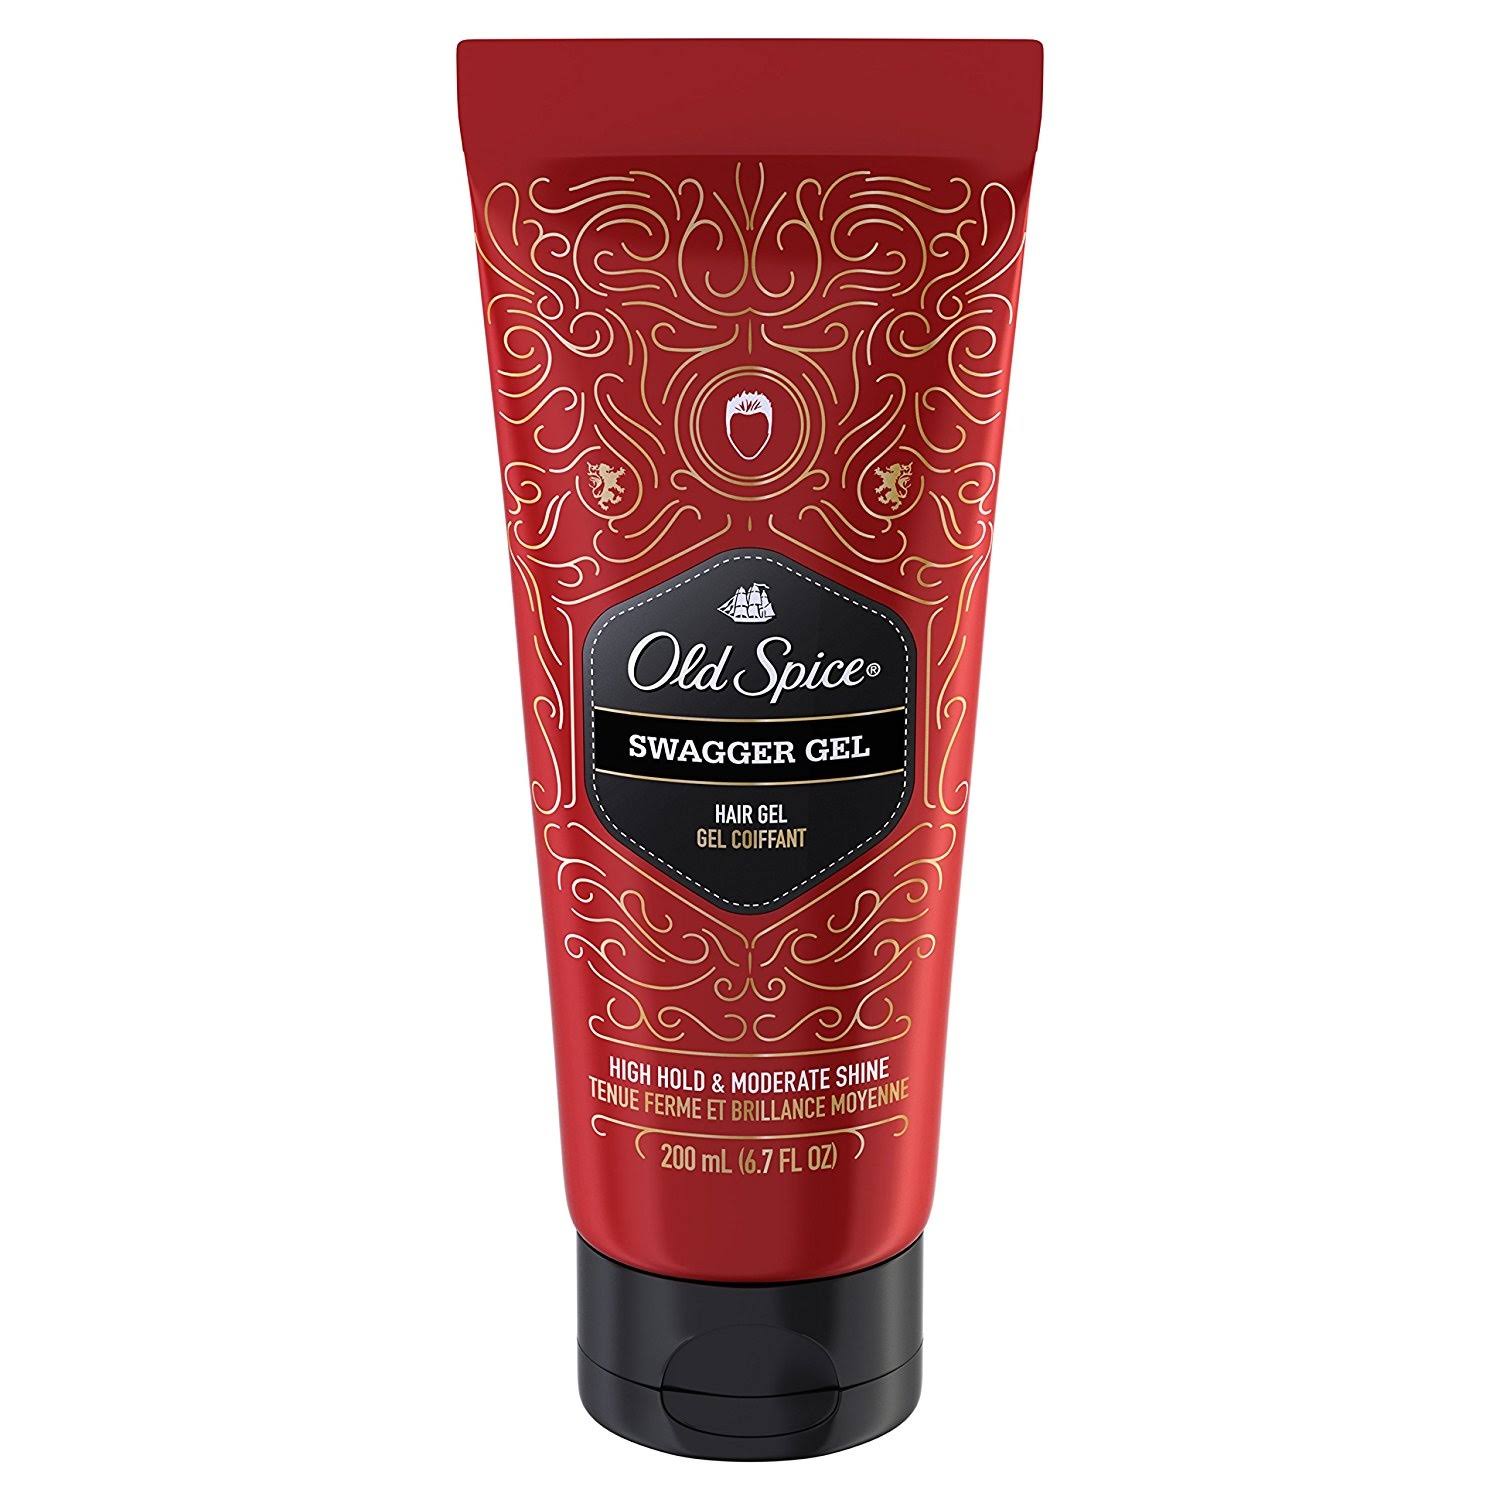 Old Spice Swagger Hair Gel - 6.7oz